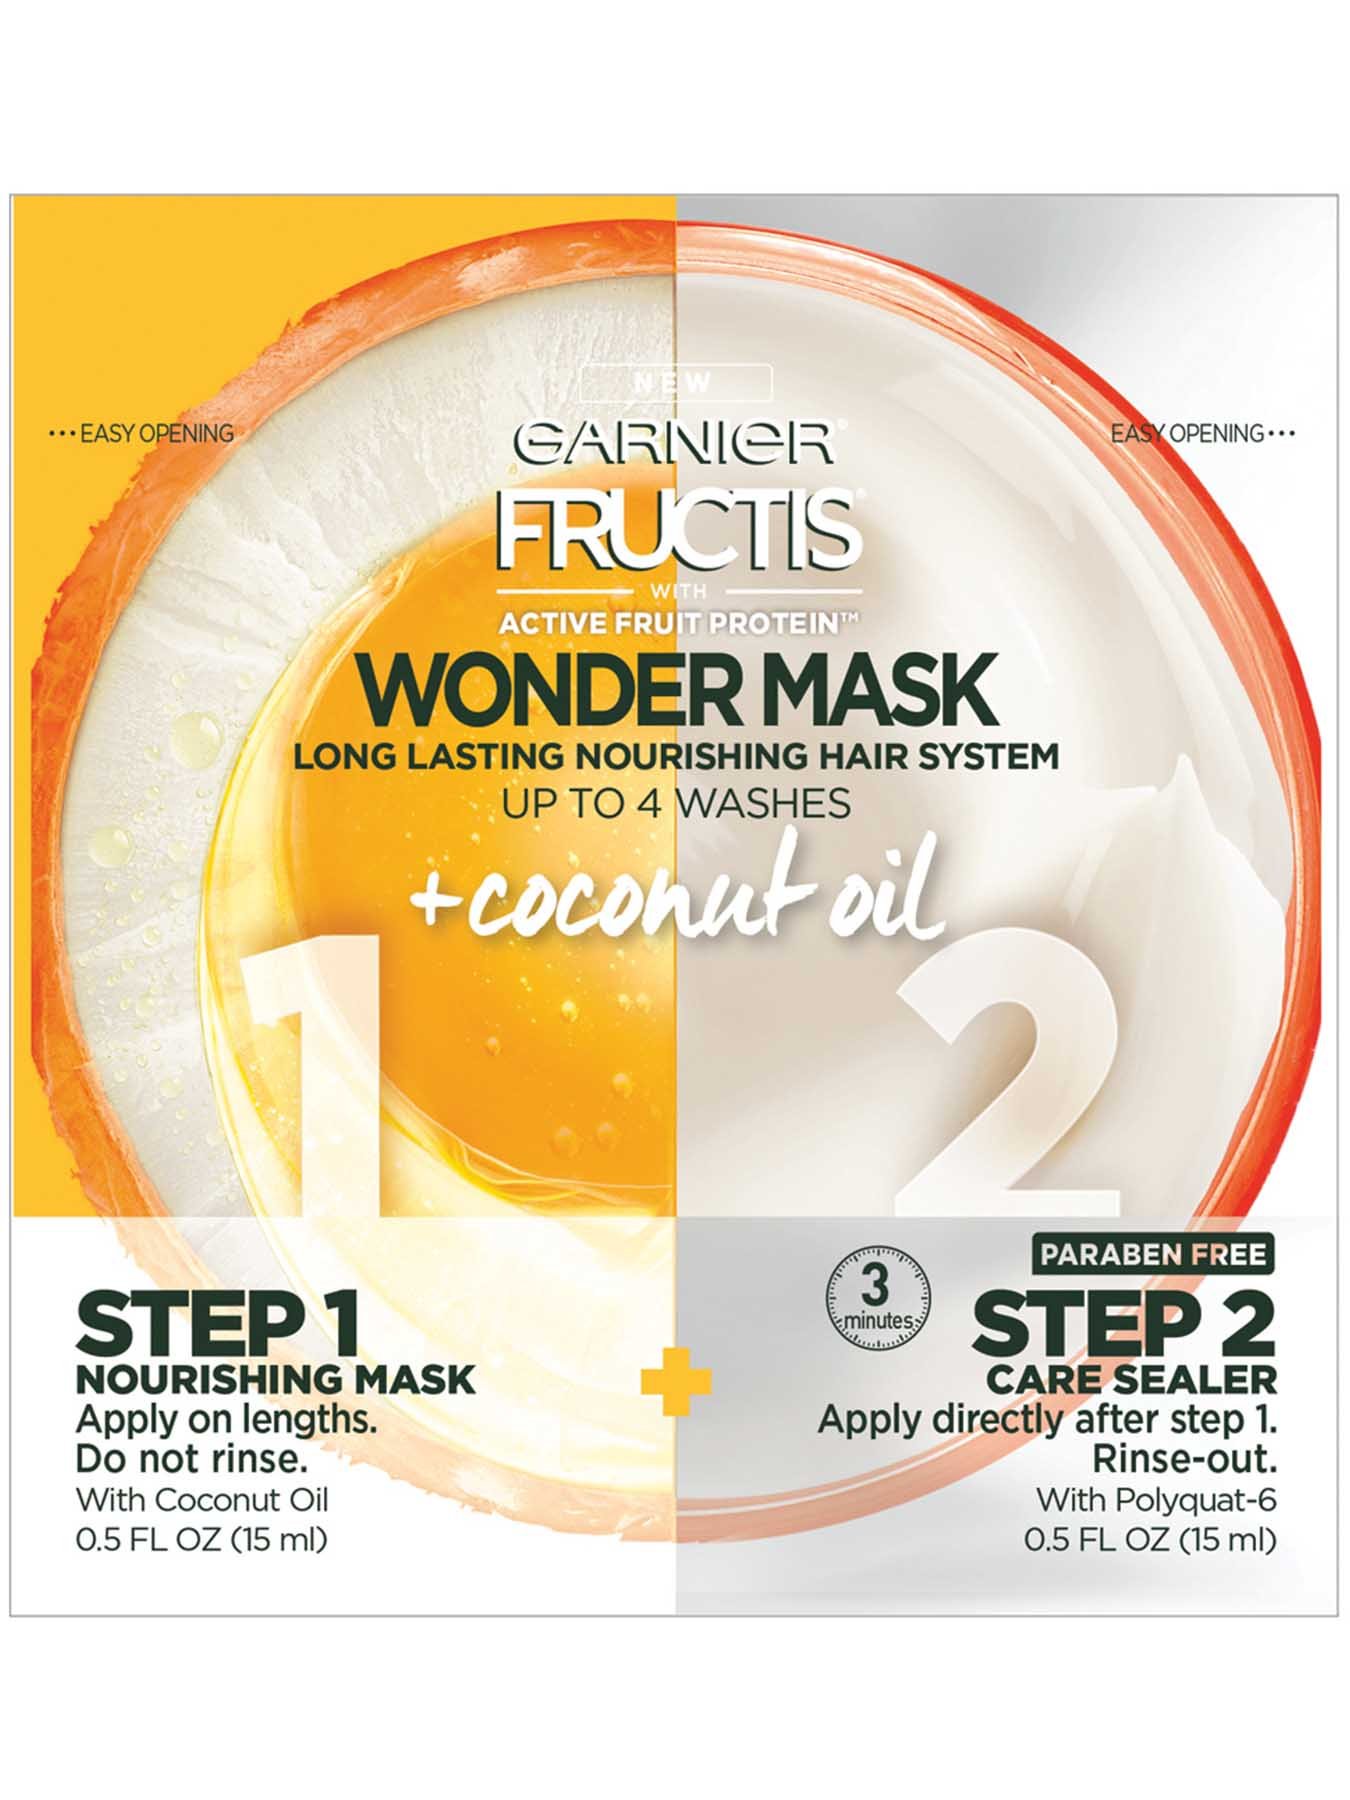 Front view of Wonder Mask with Active Fruit Protein Plus Coconut Oil.